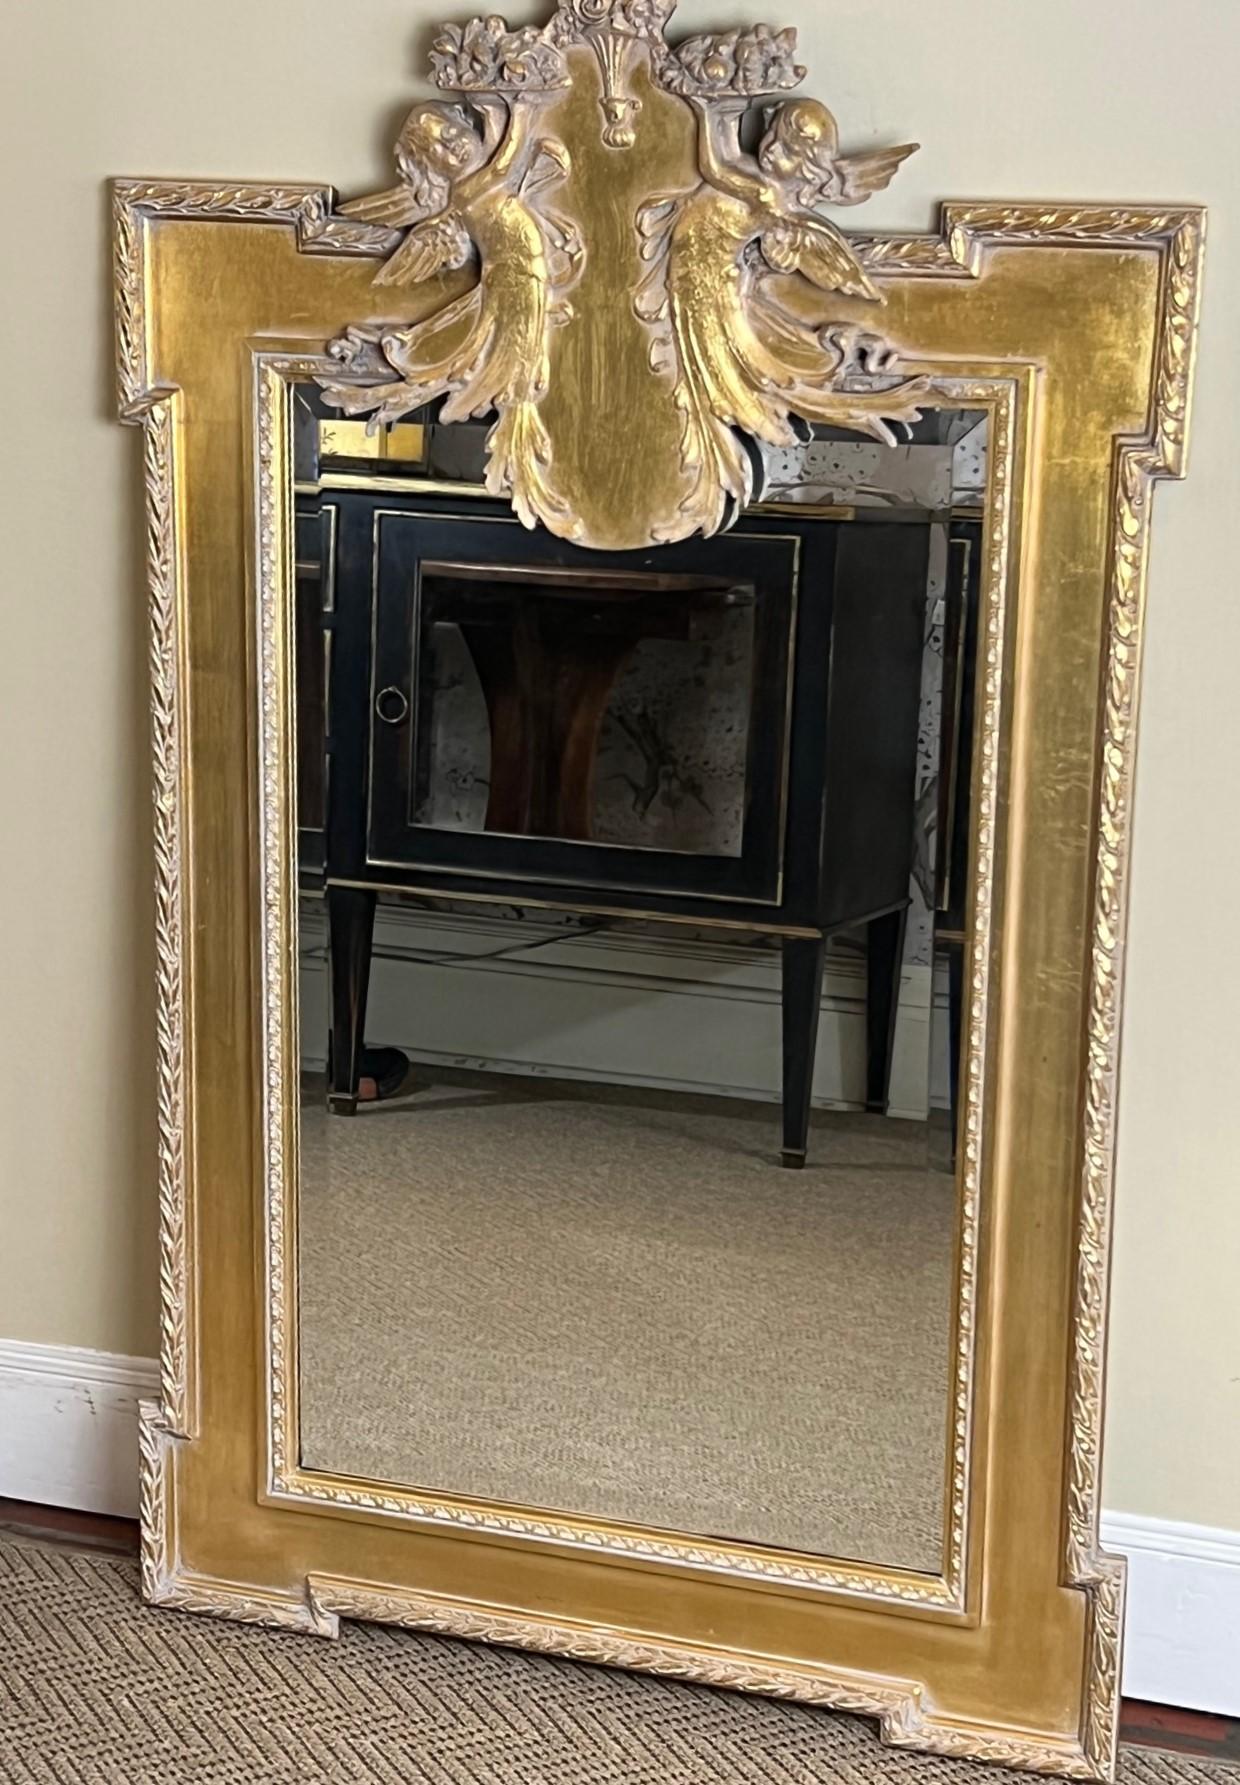 An attractive vintage pier/wall mirror that combines gilt-wood elements with the clean and refined lines championed in the neoclassical era. The carved frame features geometric patterns and motifs inspired by nature. The frame is simple and molded